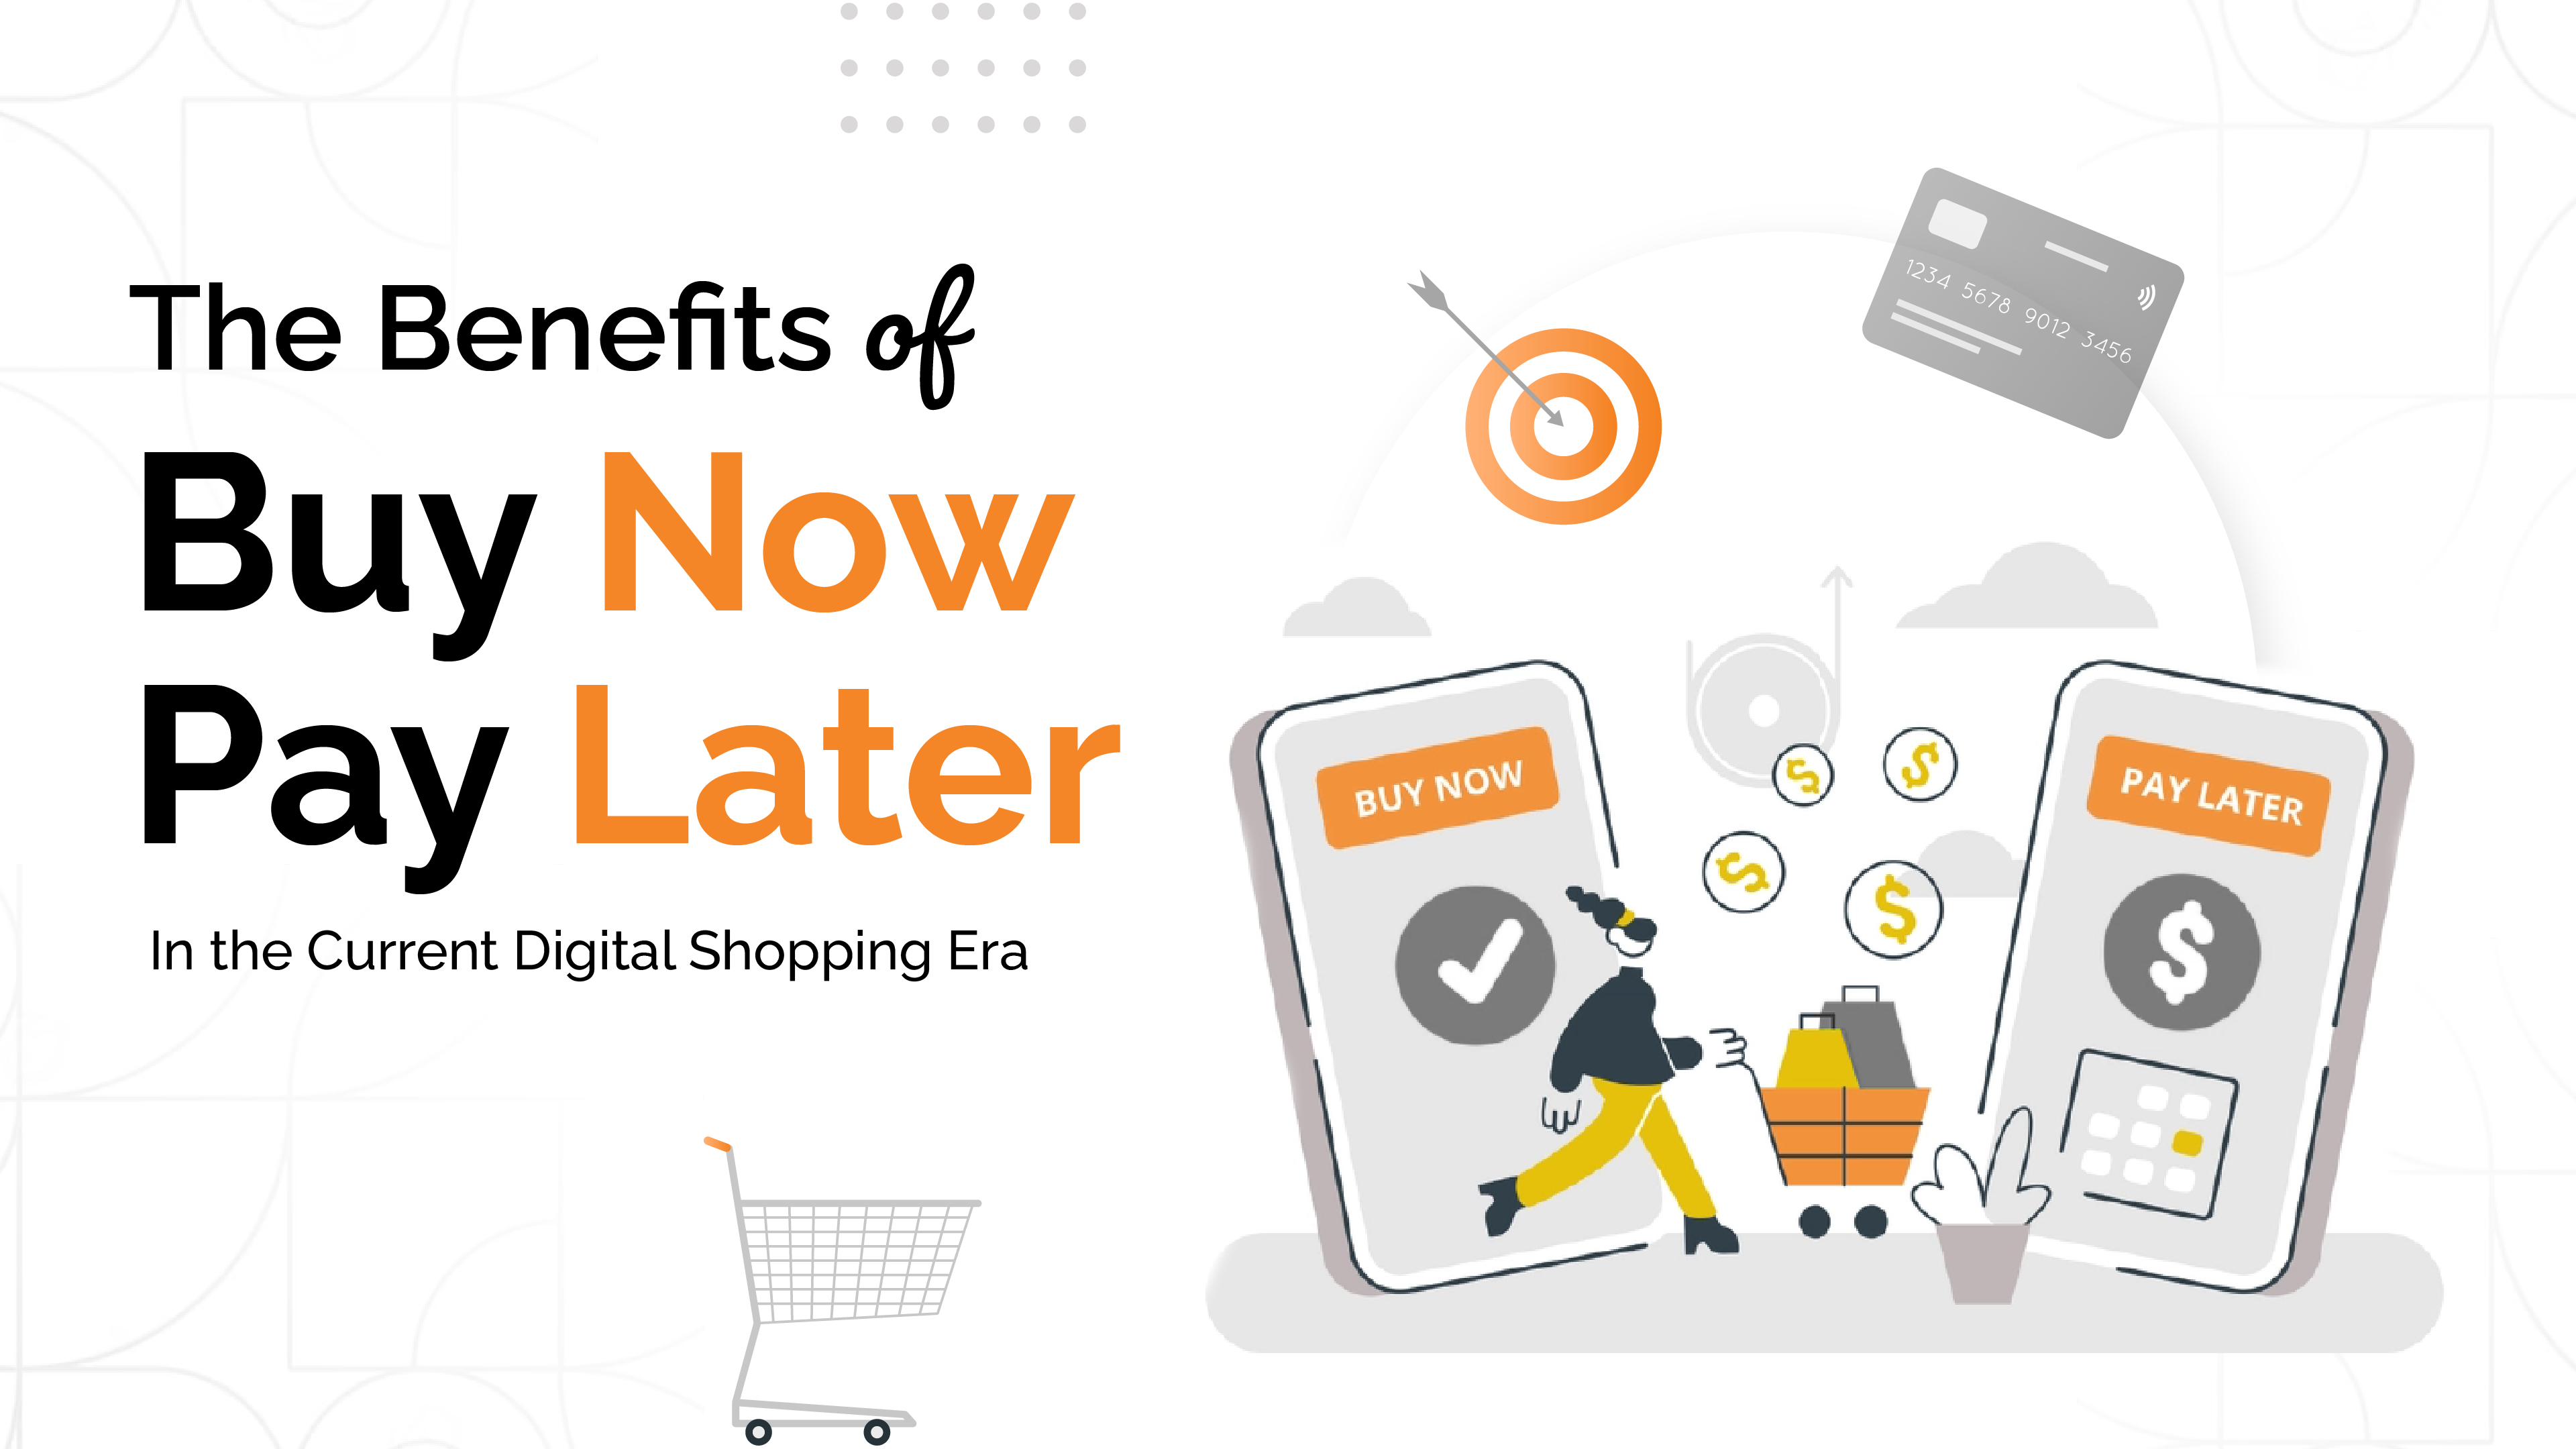 The Benefits of Buy Now, Pay Later in the current Digital Shopping Era